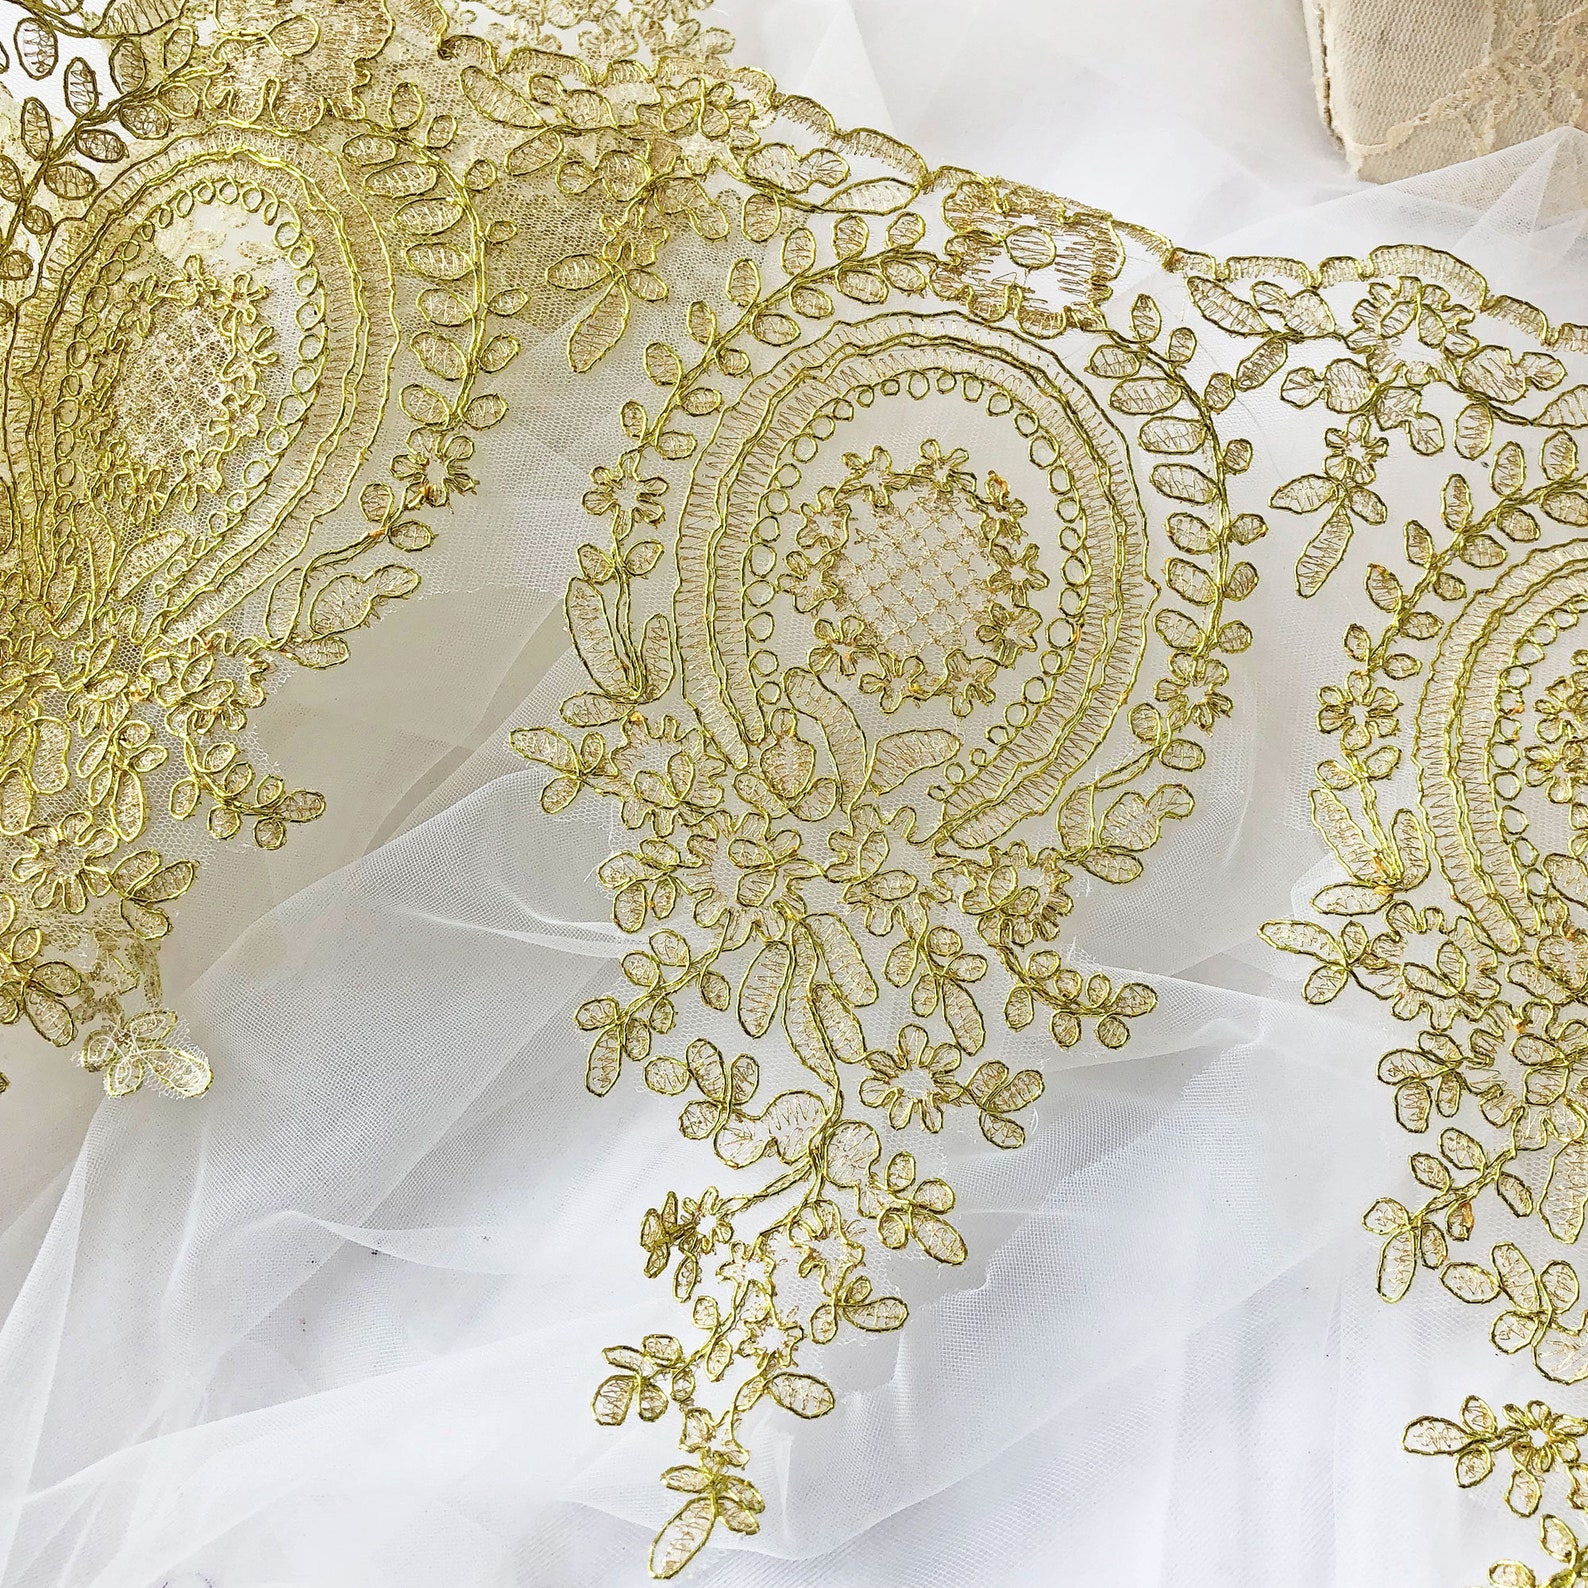 Golden Corded Lace Trim by the Yard Vintage Embroidery Floral - Etsy